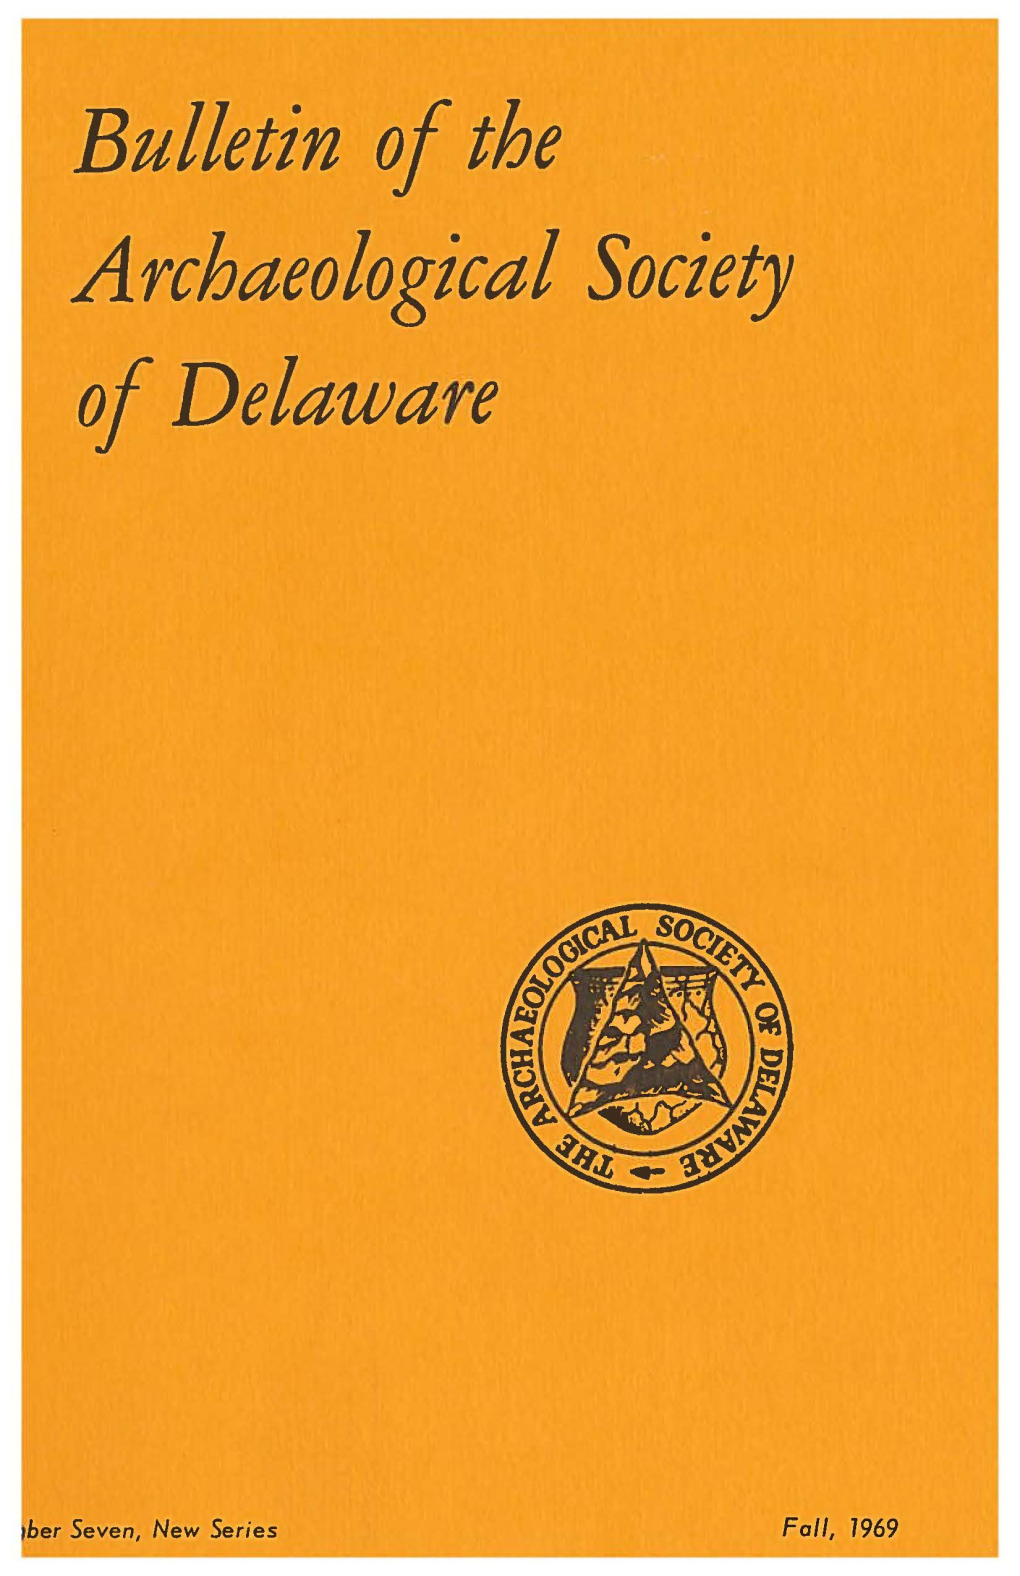 Bulletin of the Archaeological Society of Delaware